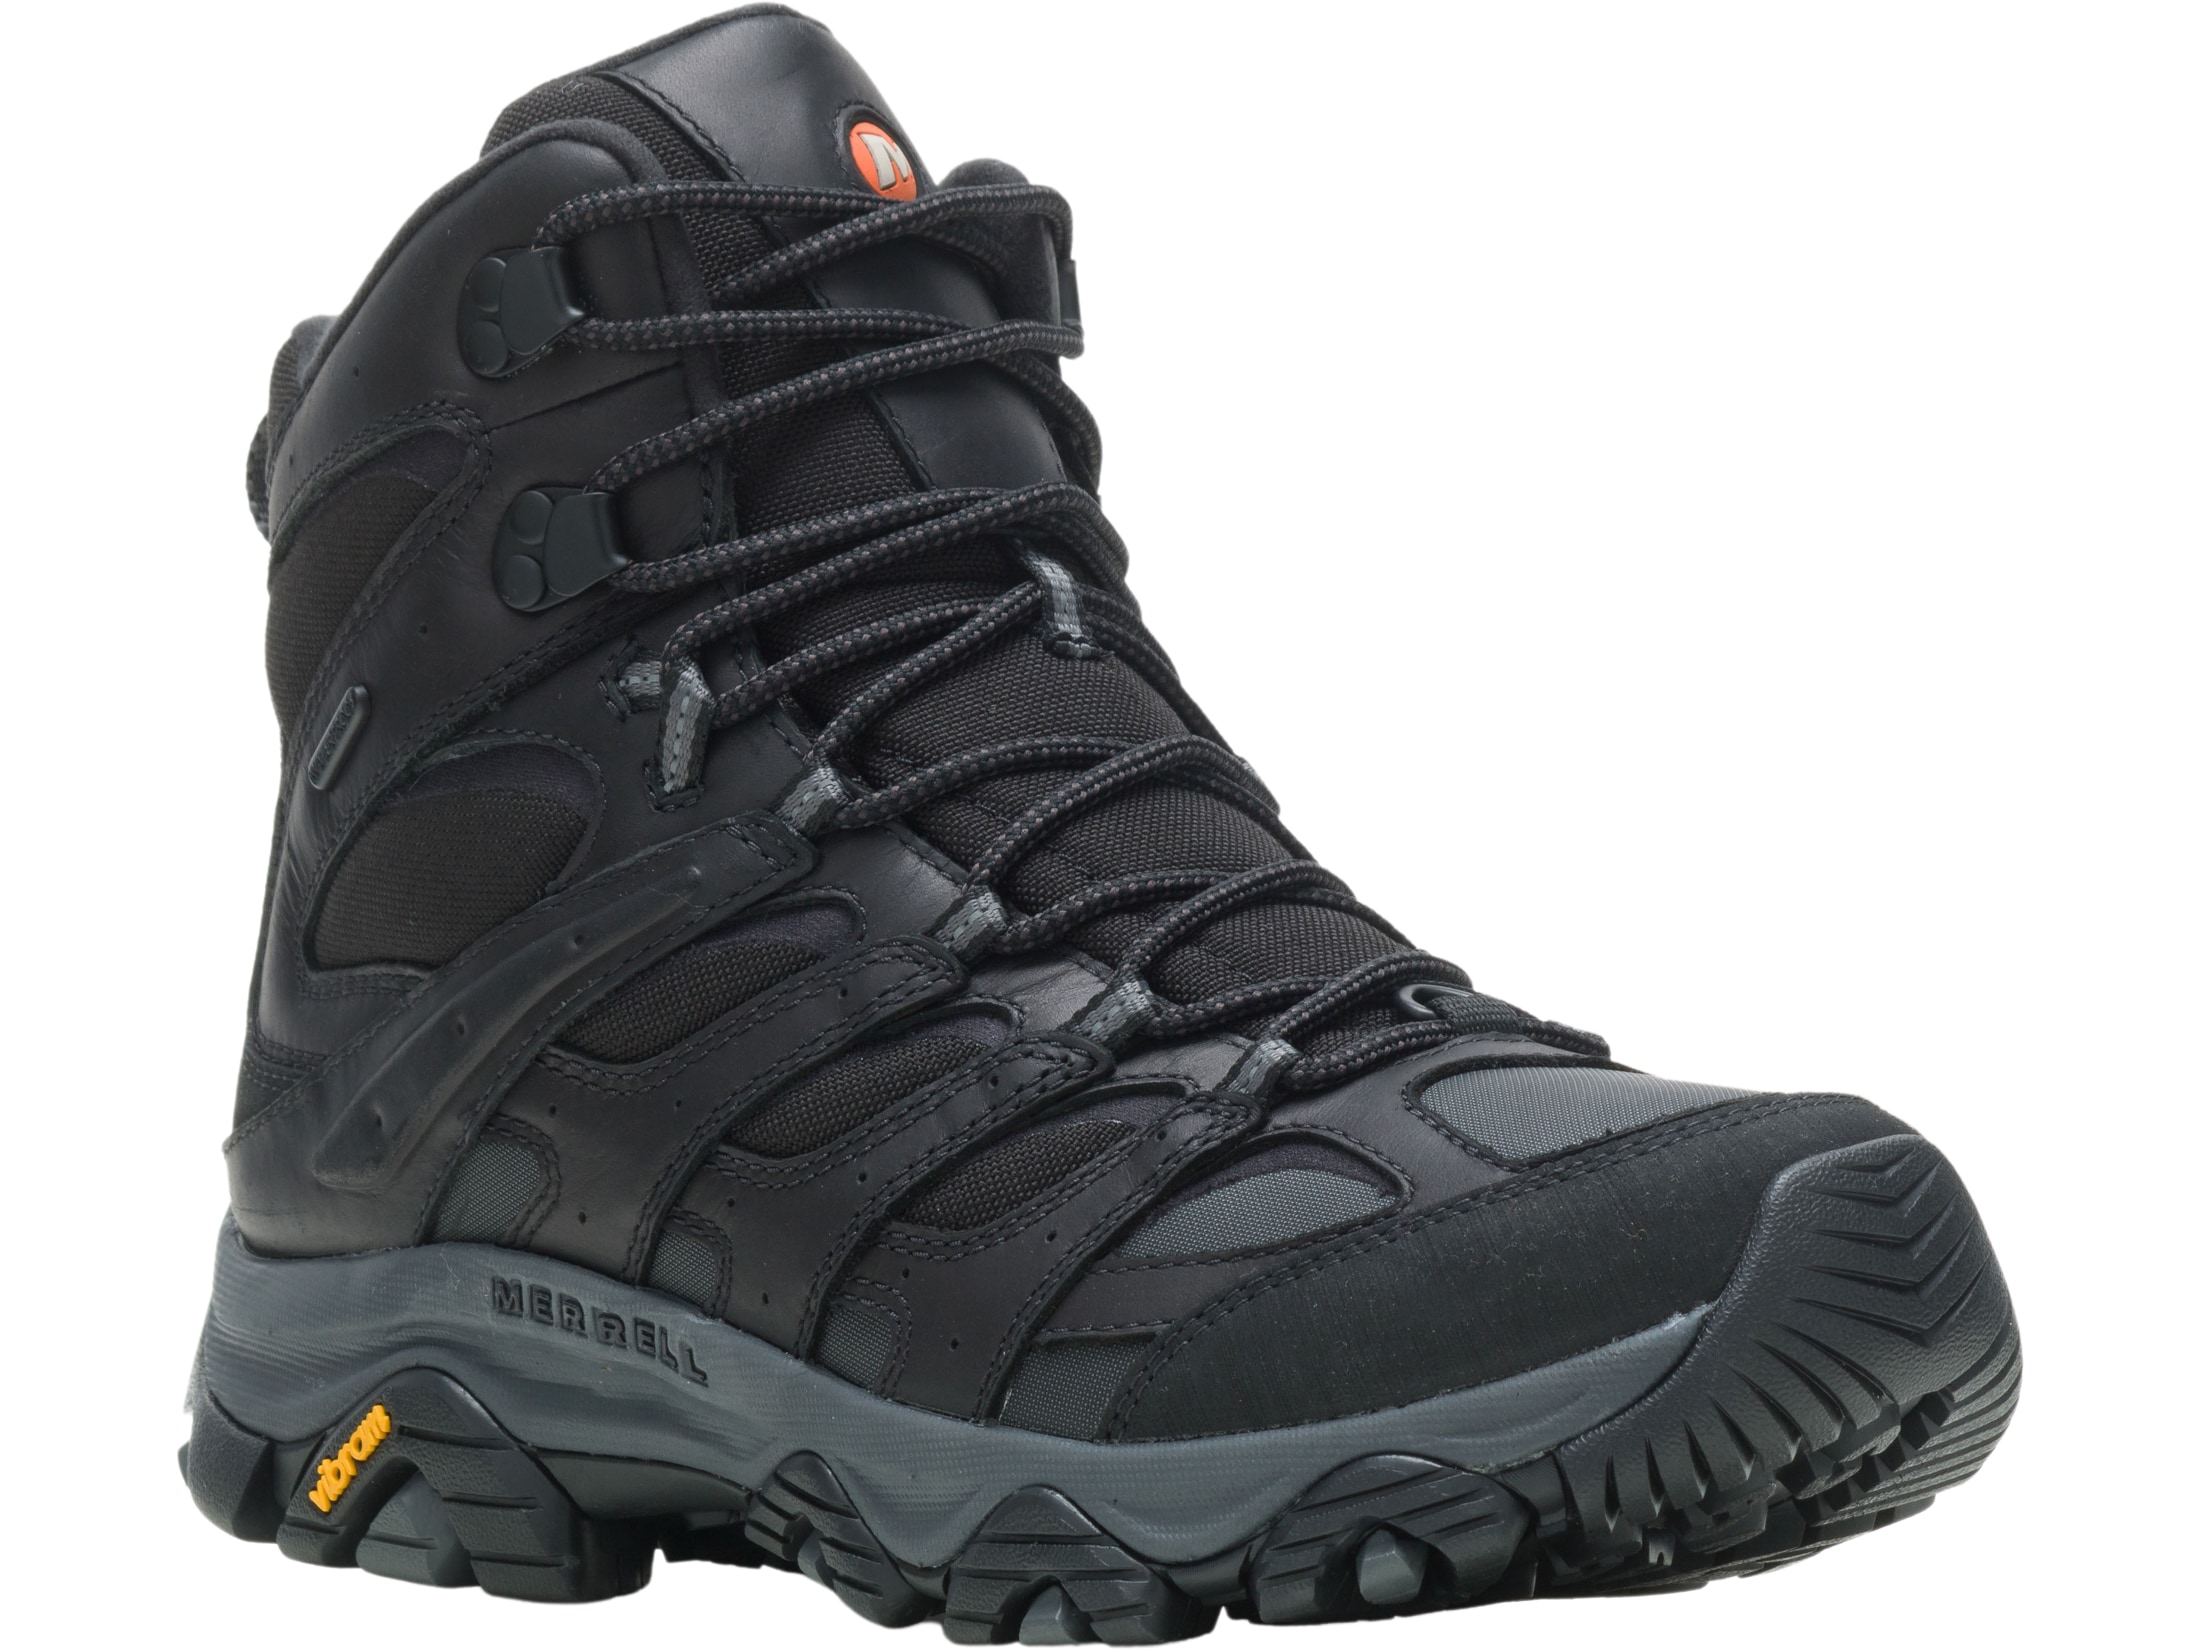 Merrell Moab 3 Thermo Tall Insulated Hiking Boots Leather Black Men's